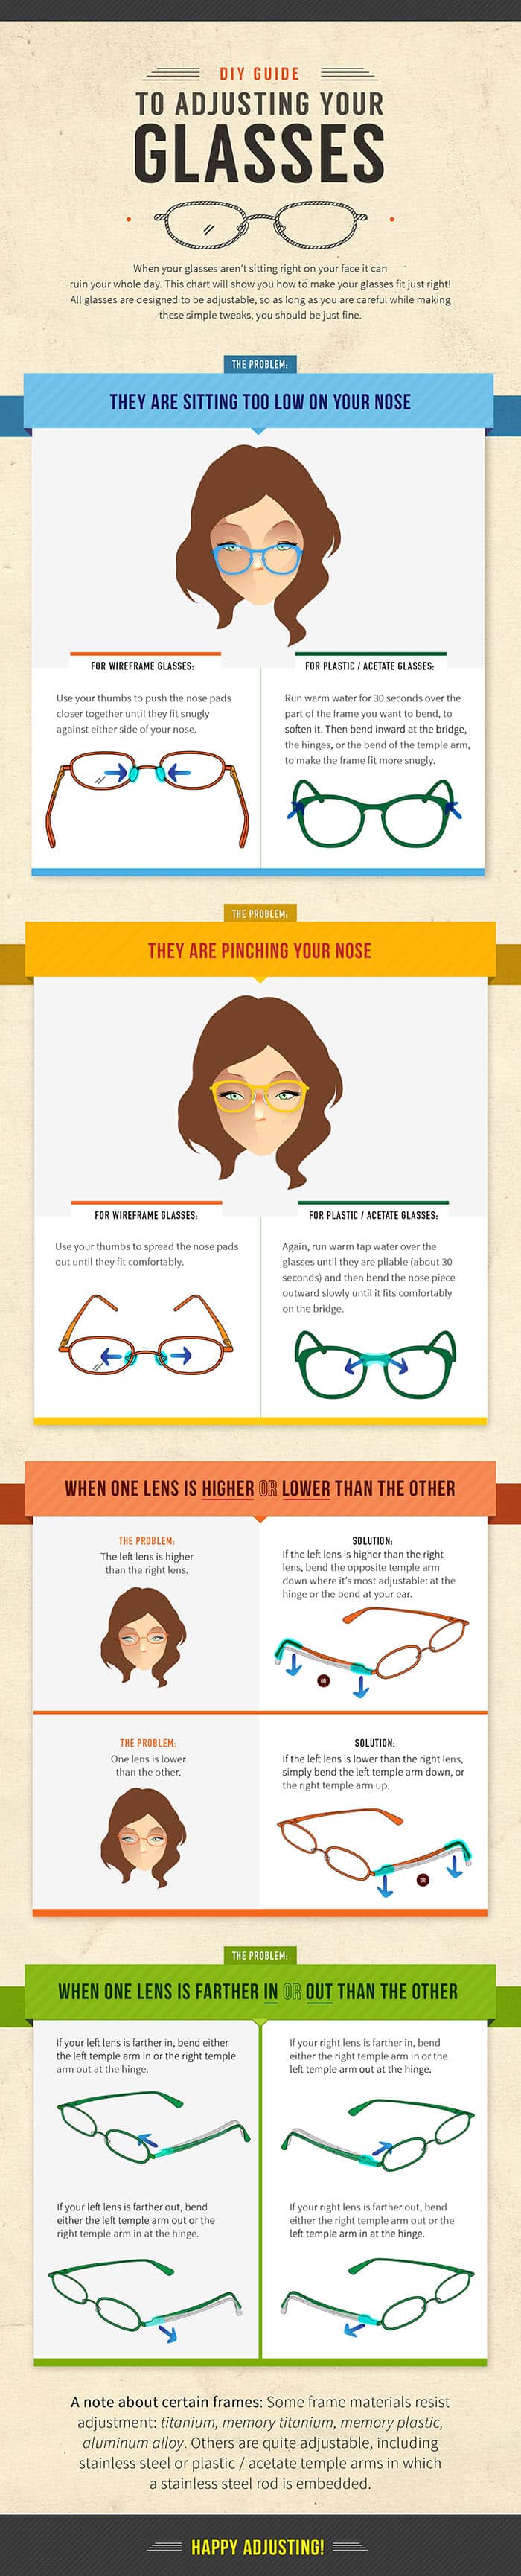 How to adjust your glasses? - Infographic